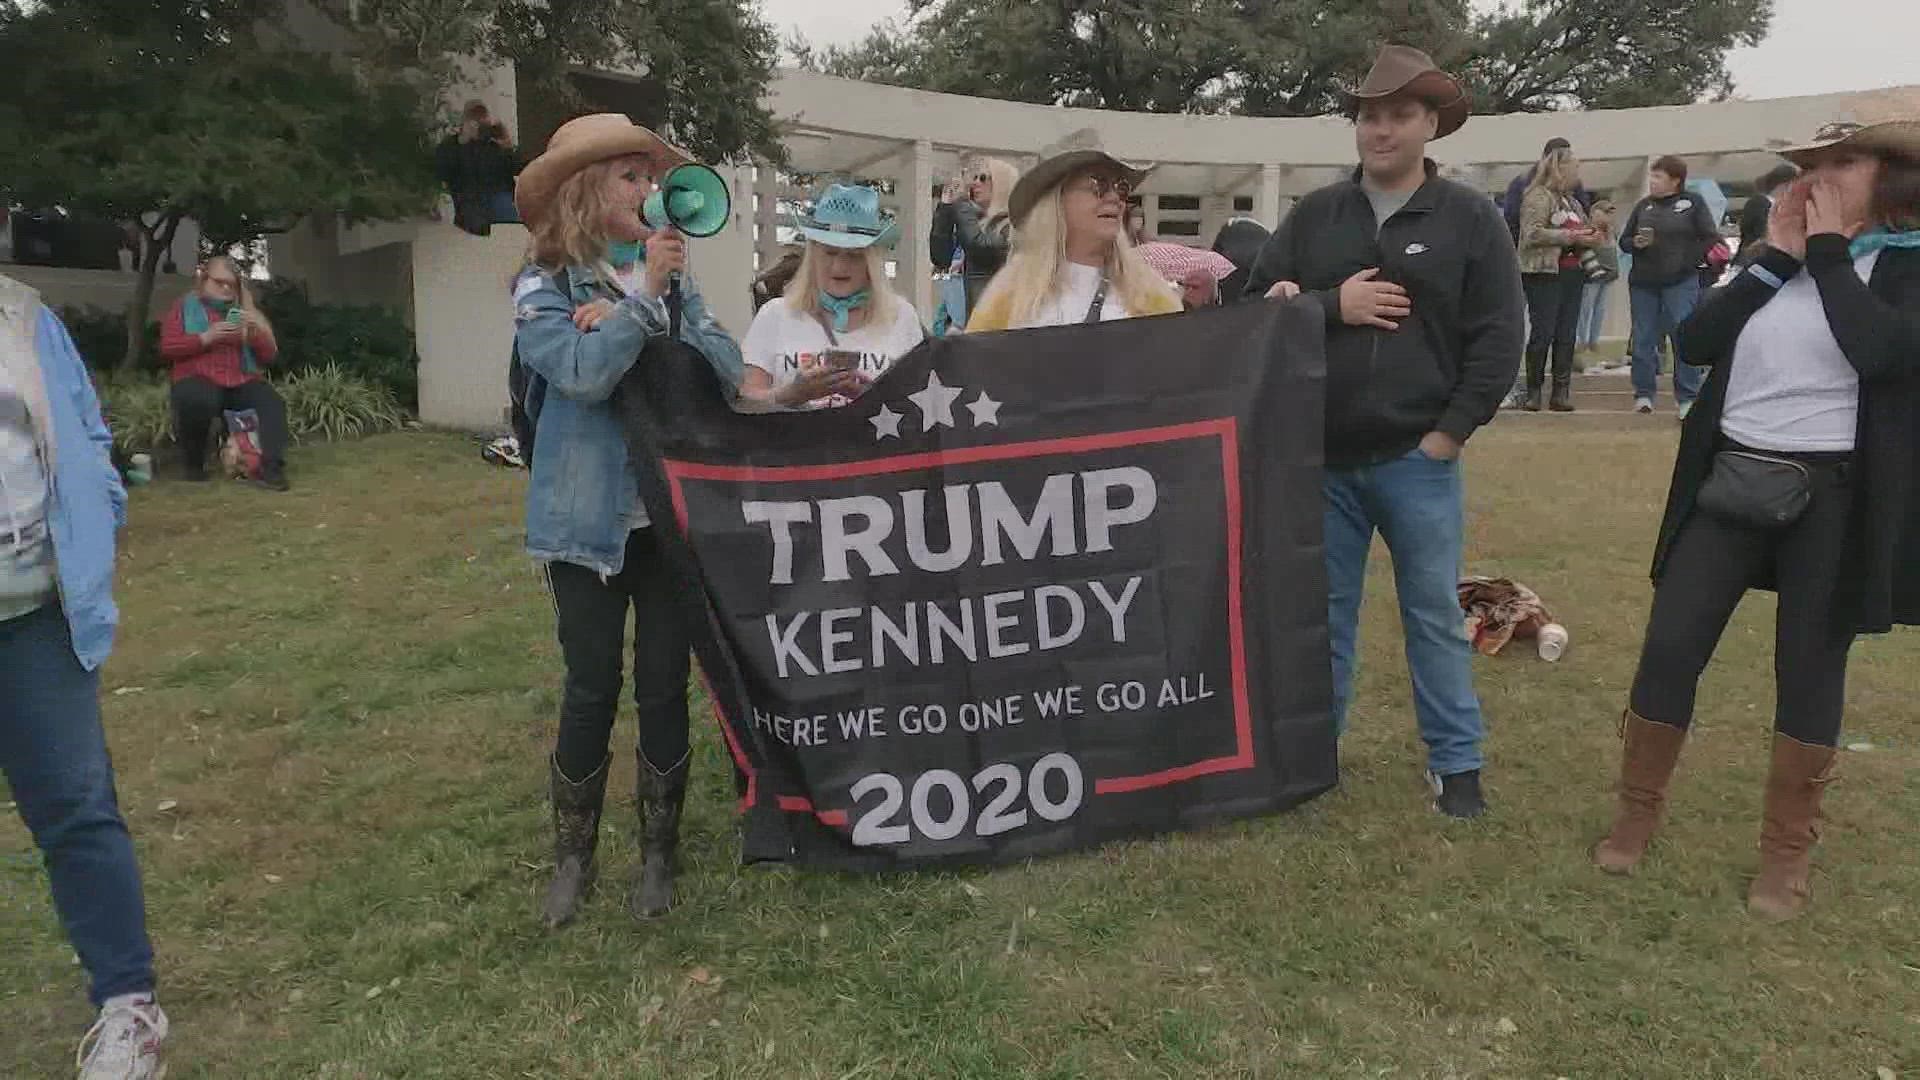 In the last few months, QAnon followers have been flocking to Dallas. Last month, WFAA's Kevin Reece was at Dealey Plaza as hundreds of followers come together.